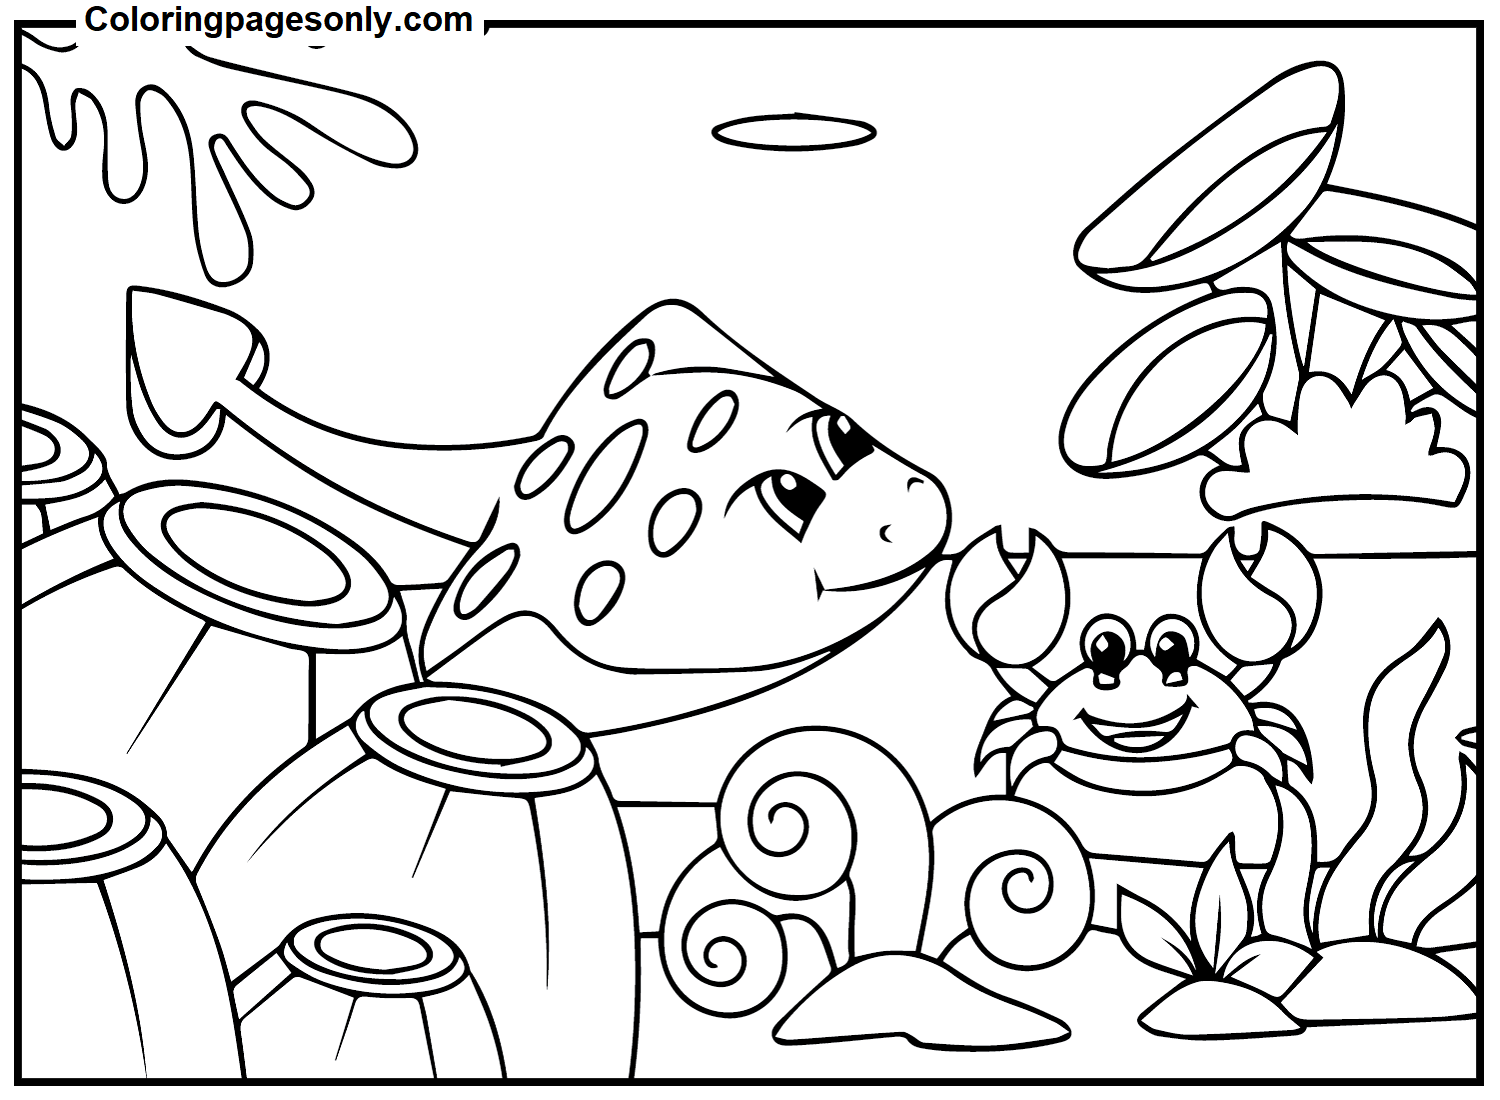 Stingray And Crab Coloring Pages